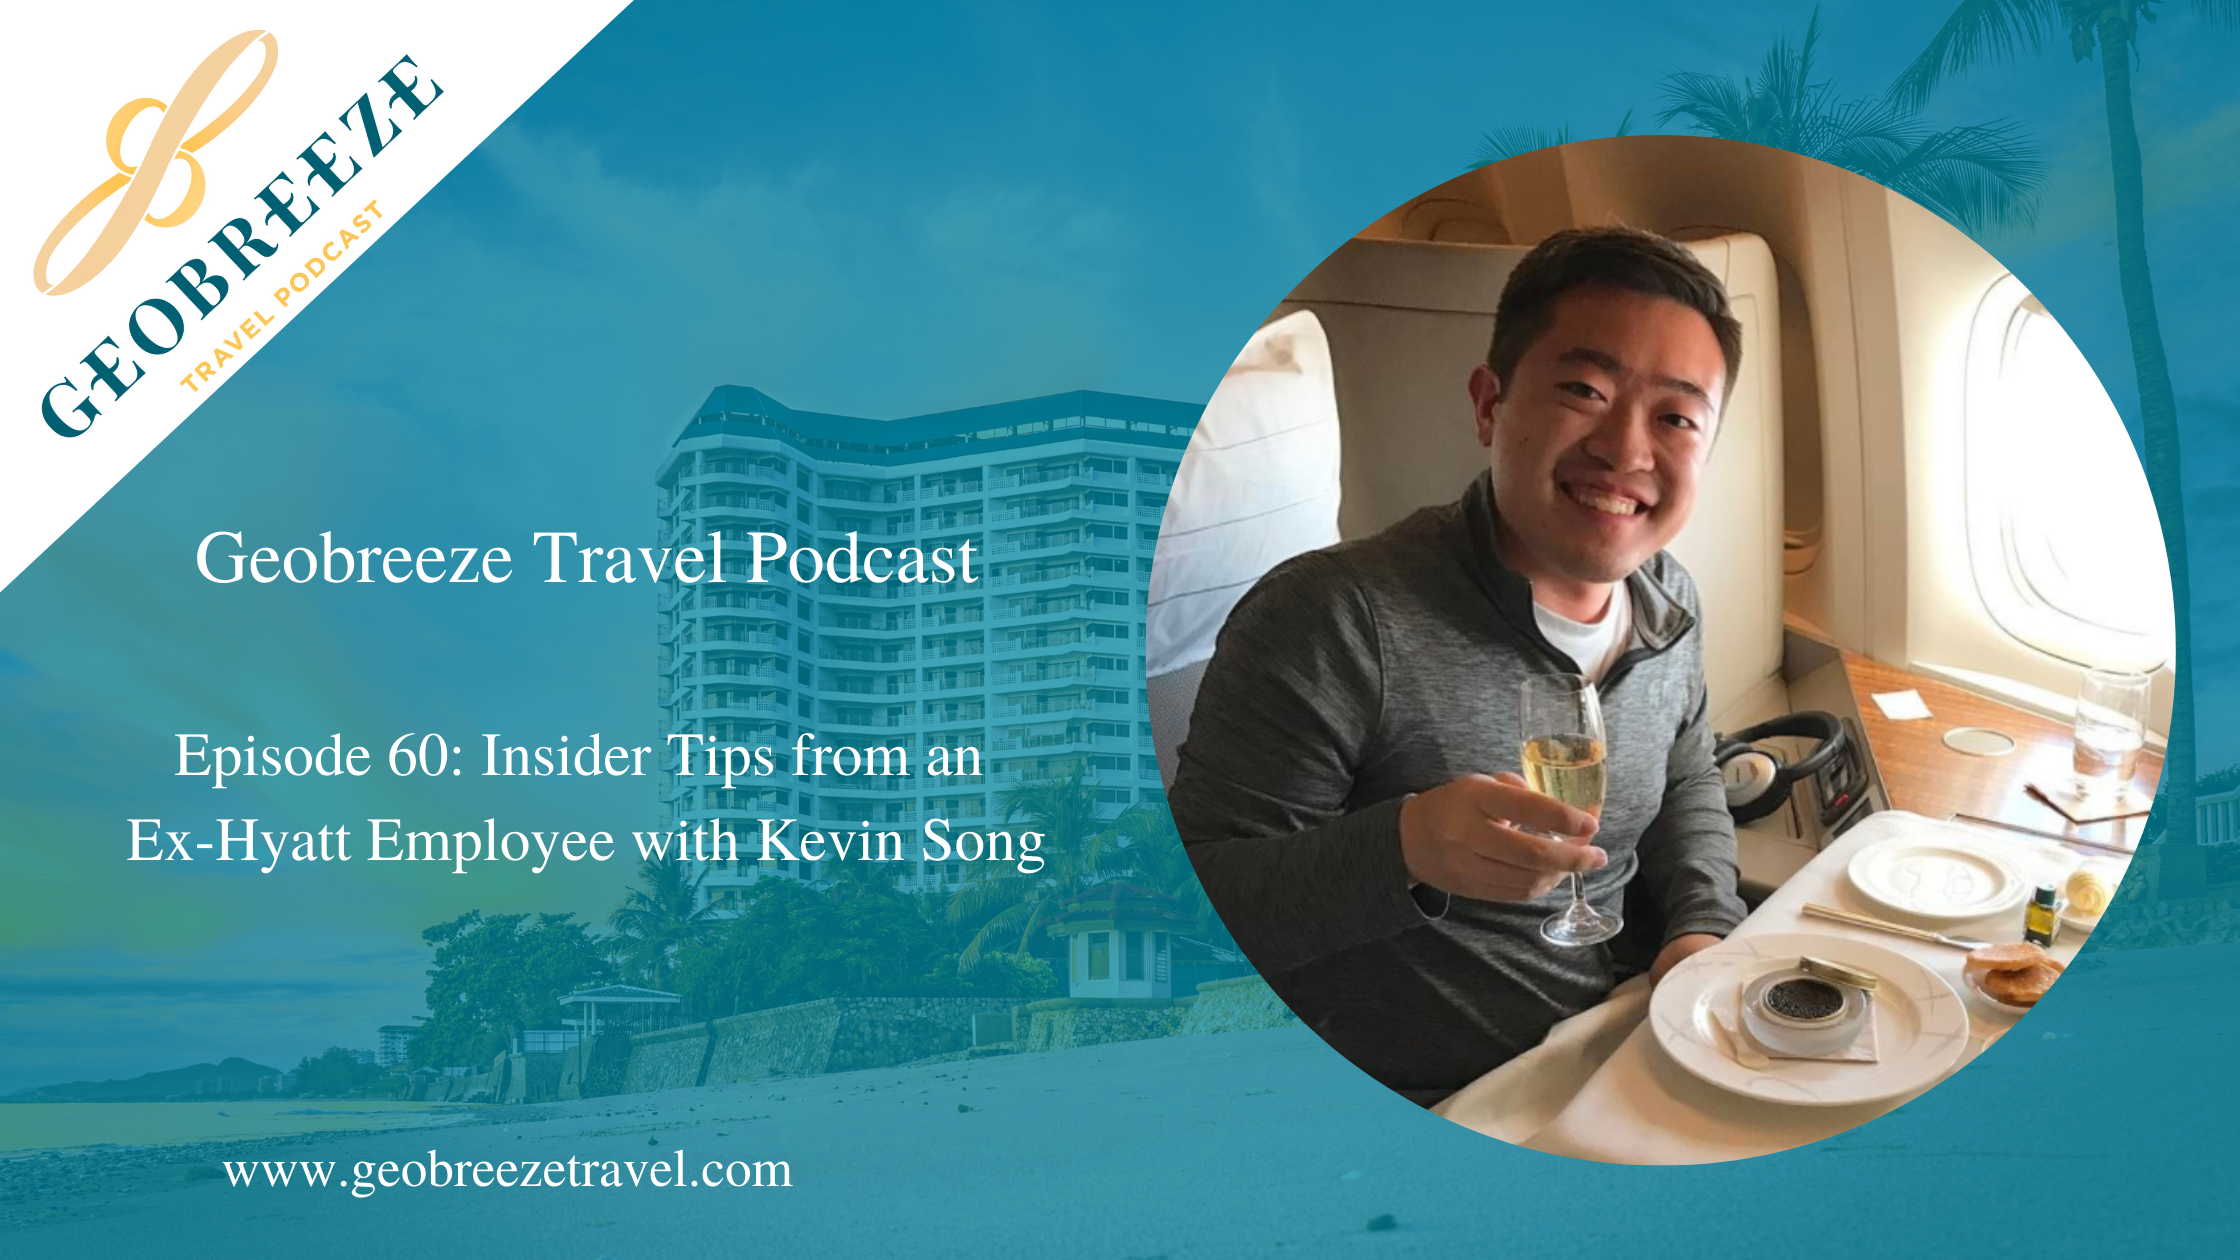 Episode 60: Insider Tips from an Ex-Hyatt Employee with Kevin Song